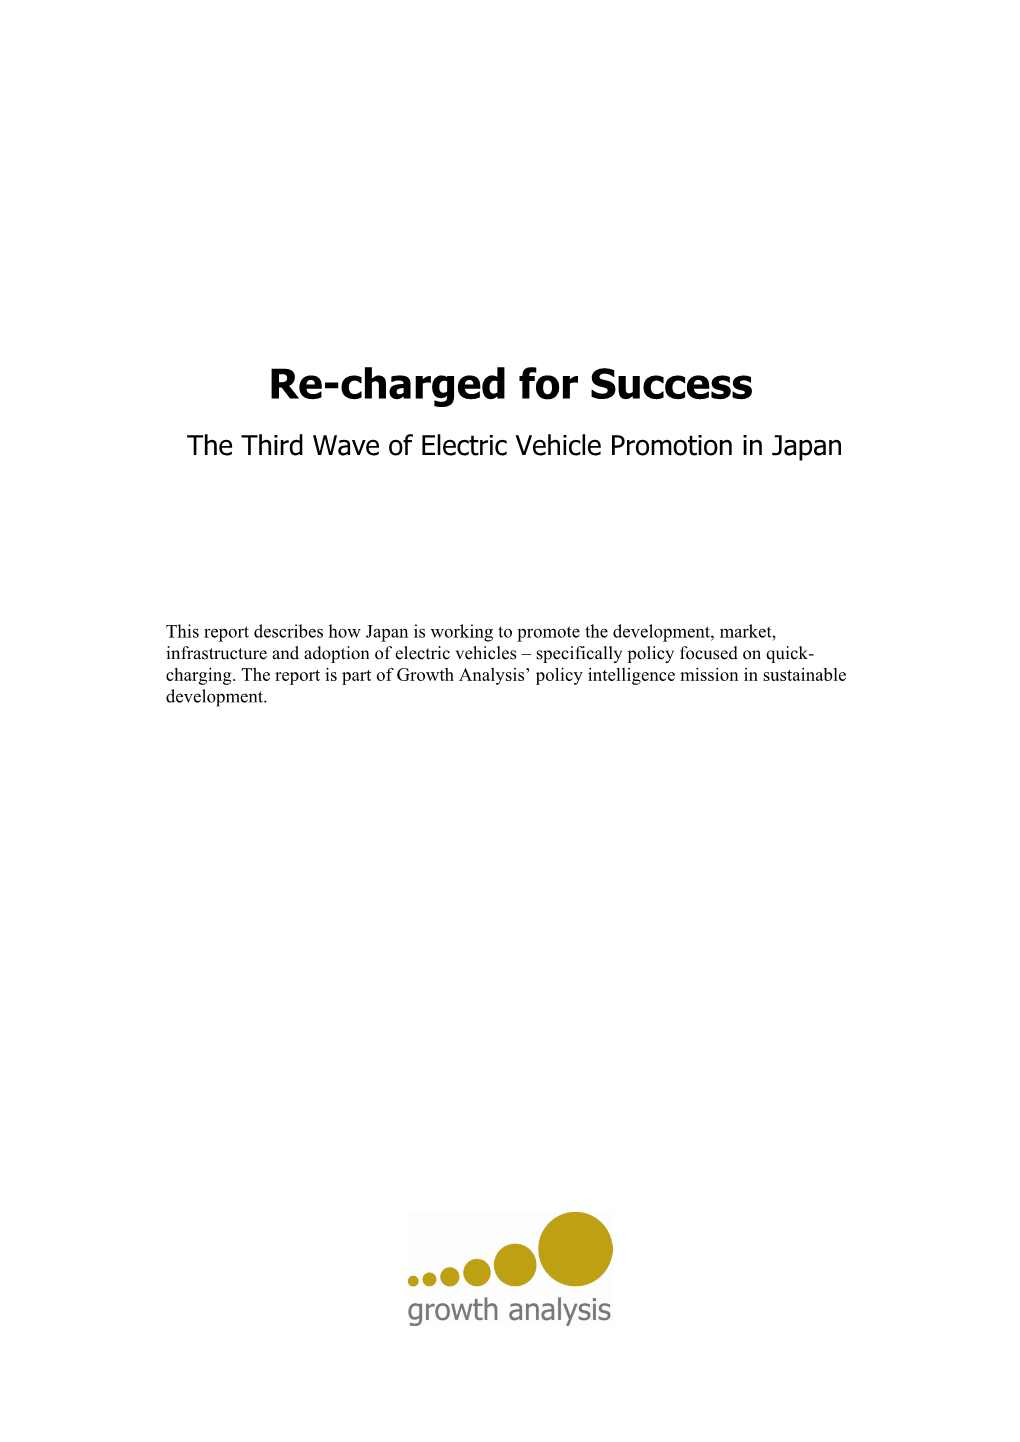 Re-Charged for Success the Third Wave of Electric Vehicle Promotion in Japan